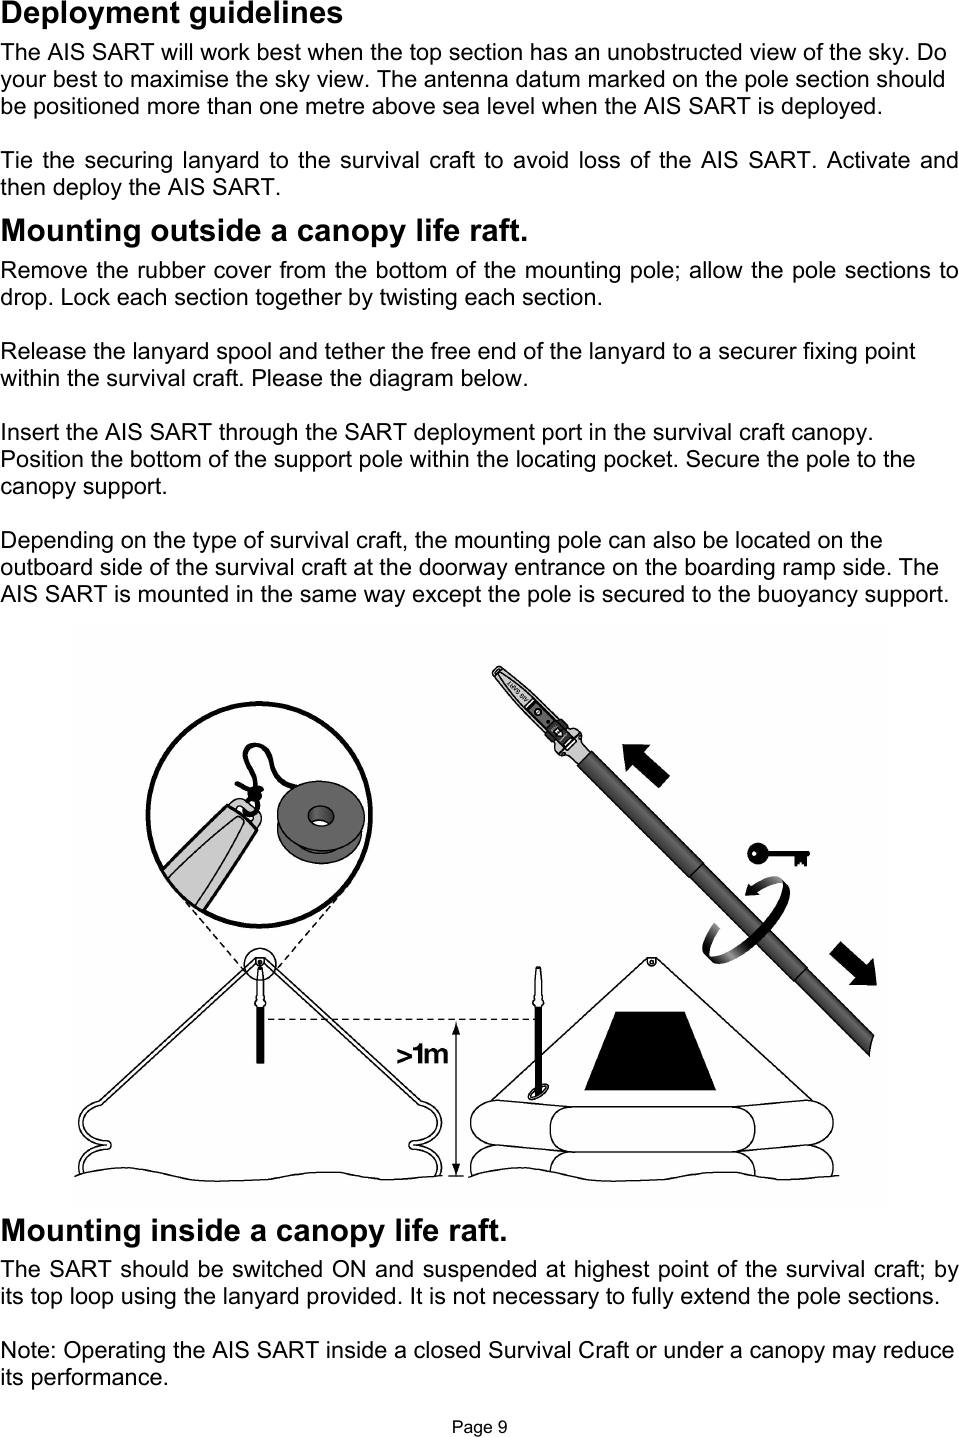  Page 9 Deployment guidelines The AIS SART will work best when the top section has an unobstructed view of the sky. Do your best to maximise the sky view. The antenna datum marked on the pole section should be positioned more than one metre above sea level when the AIS SART is deployed.   Tie  the  securing  lanyard  to  the  survival  craft  to  avoid  loss  of the  AIS  SART.  Activate  and then deploy the AIS SART.  Mounting outside a canopy life raft. Remove the rubber cover from the bottom of the mounting pole; allow the pole sections to drop. Lock each section together by twisting each section.  Release the lanyard spool and tether the free end of the lanyard to a securer fixing point within the survival craft. Please the diagram below.  Insert the AIS SART through the SART deployment port in the survival craft canopy.  Position the bottom of the support pole within the locating pocket. Secure the pole to the canopy support.   Depending on the type of survival craft, the mounting pole can also be located on the outboard side of the survival craft at the doorway entrance on the boarding ramp side. The AIS SART is mounted in the same way except the pole is secured to the buoyancy support.    Mounting inside a canopy life raft. The SART should be switched ON and suspended at highest point of the survival craft; by its top loop using the lanyard provided. It is not necessary to fully extend the pole sections.    Note: Operating the AIS SART inside a closed Survival Craft or under a canopy may reduce its performance. 